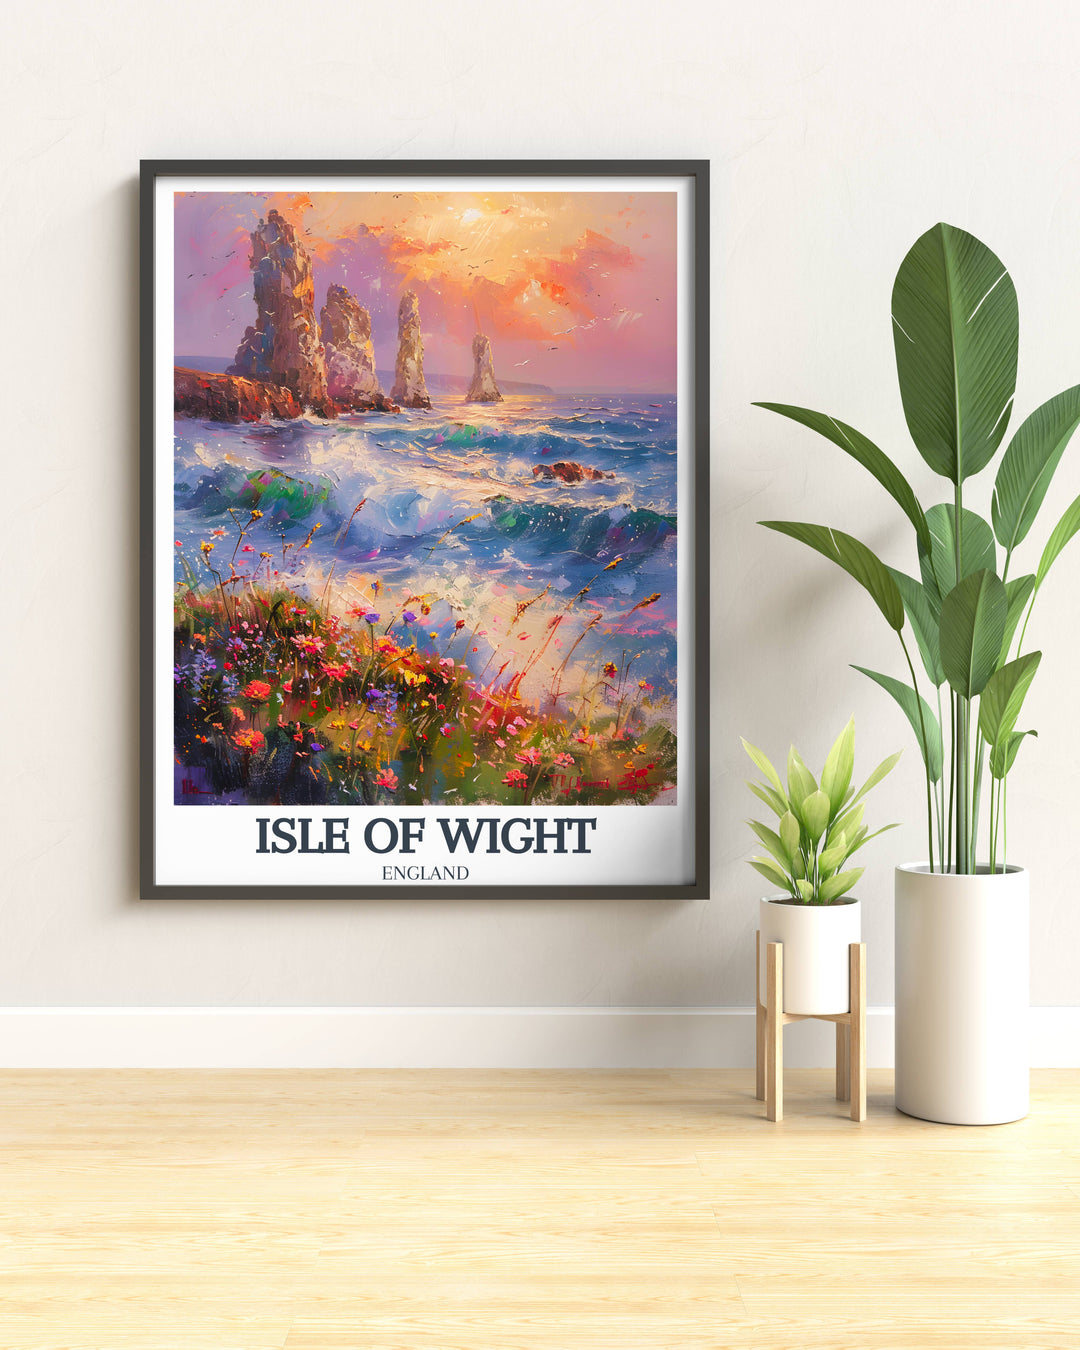 Artistic rendering showing The Needles Lighthouse during a bustling Isle of Wight market scene, using vibrant colors to highlight the historic structure amid local crafts and lively interactions, ideal for a dining room.